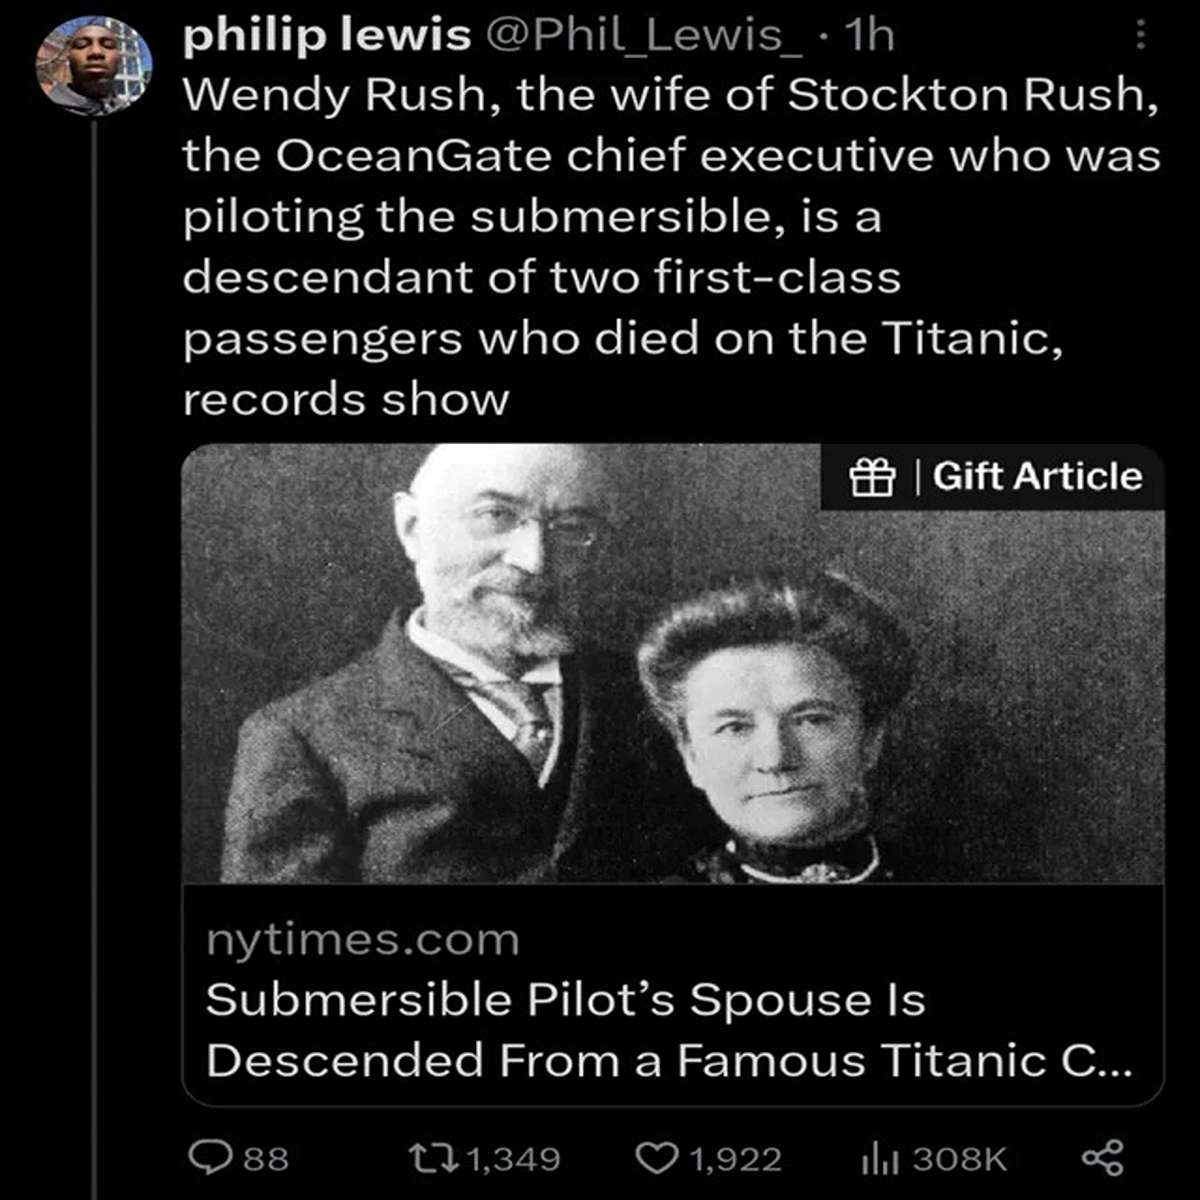 funny tweets and memes - mr and mrs straus - philip lewis . 1h Wendy Rush, the wife of Stockton Rush, the OceanGate chief executive who was piloting the submersible, is a descendant of two firstclass passengers who died on the Titanic, records show nytime